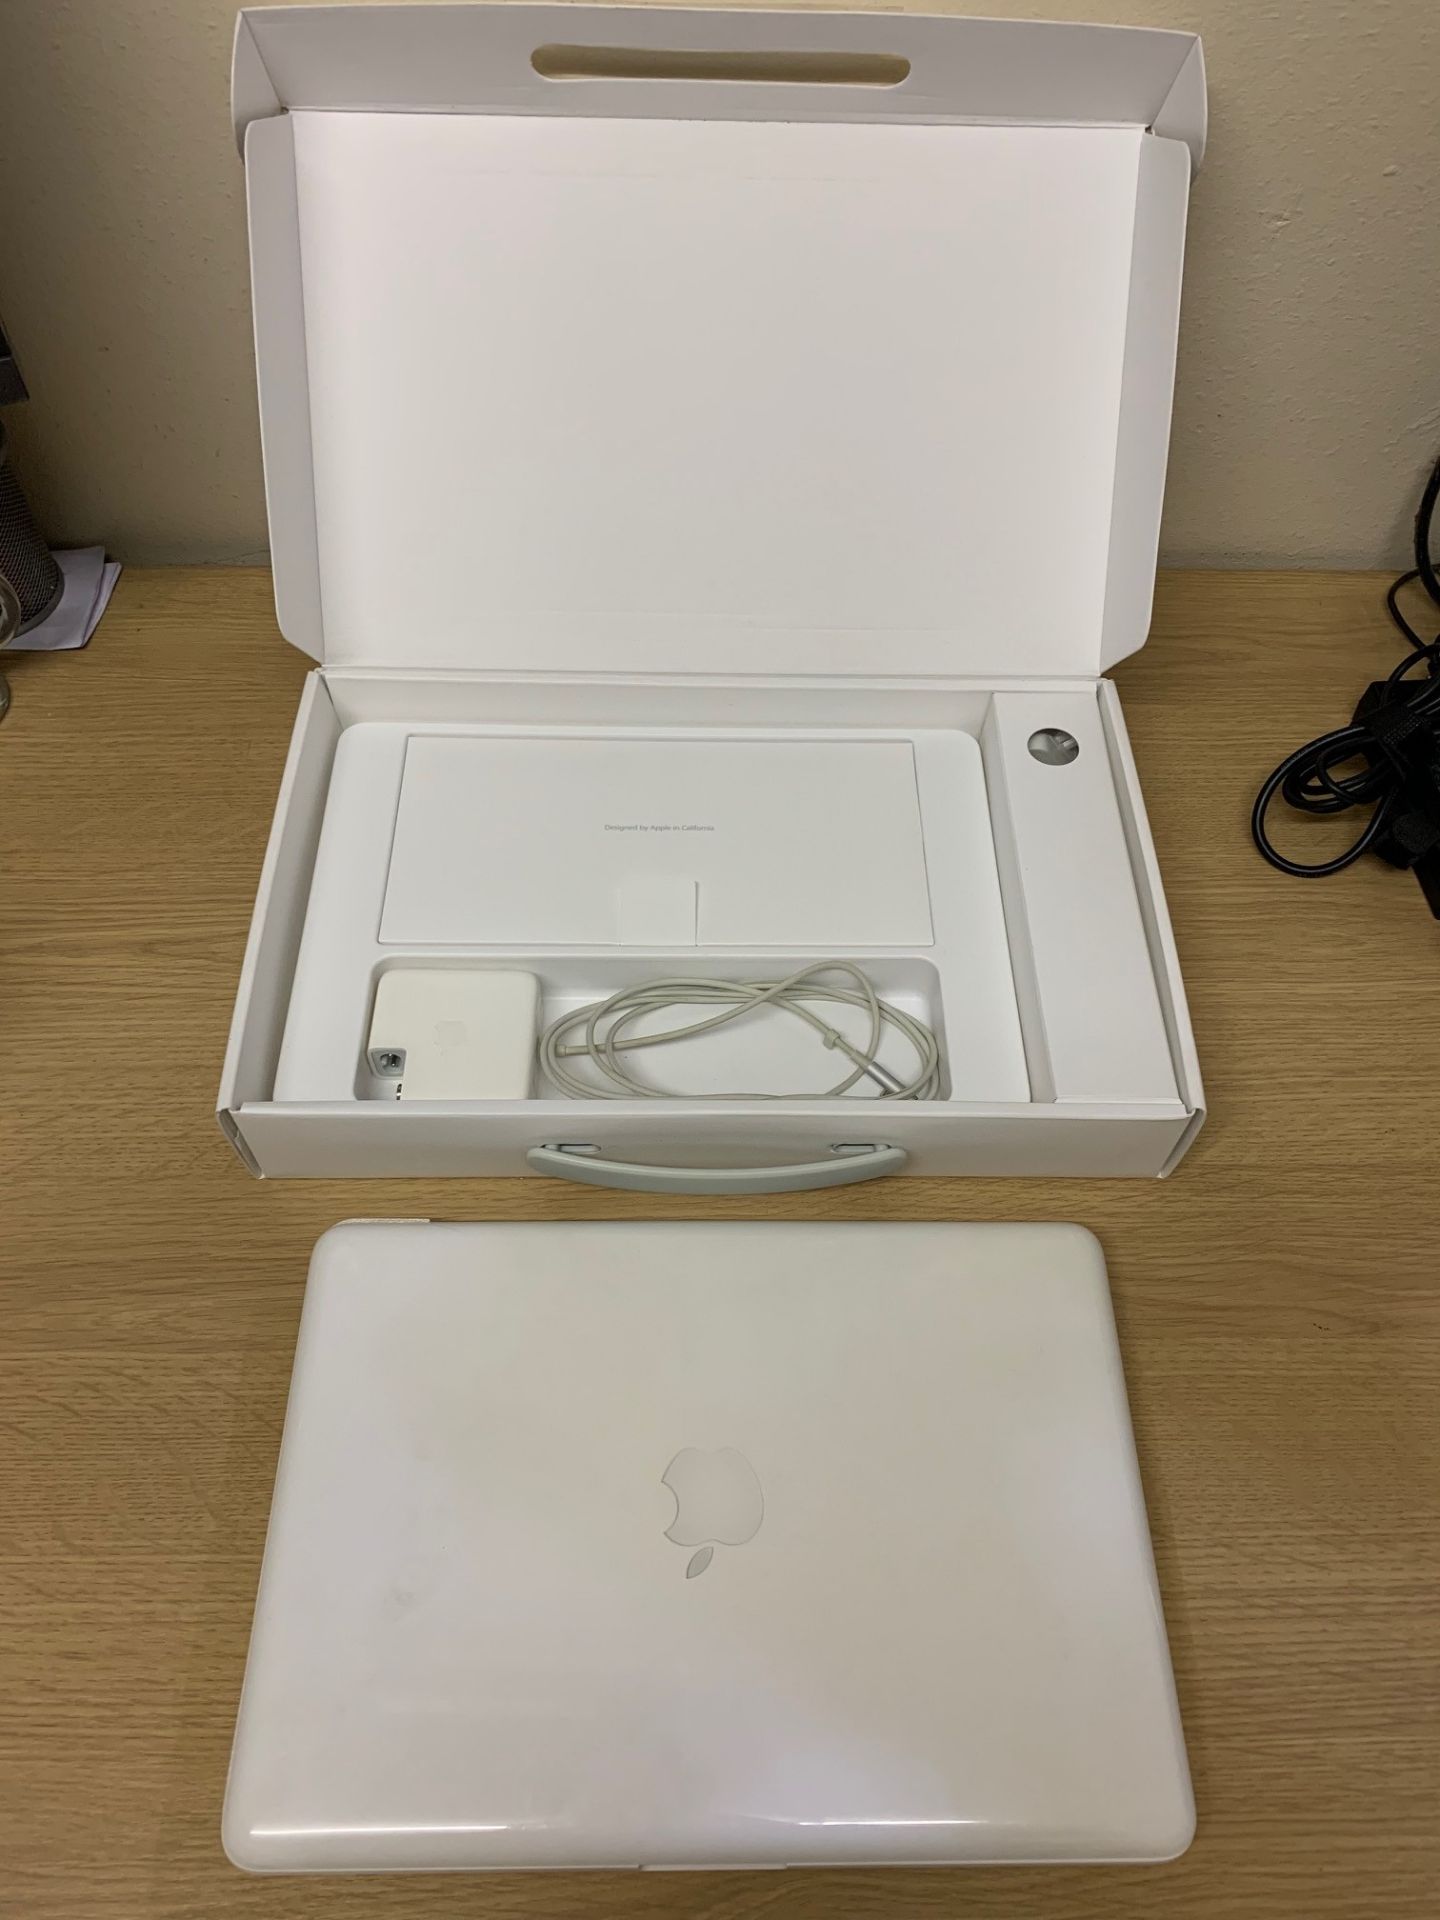 Apple MacBook - Model A1342, 2.4GHz, 250GB Hard Drive, Includes Box & Charger - Image 2 of 4